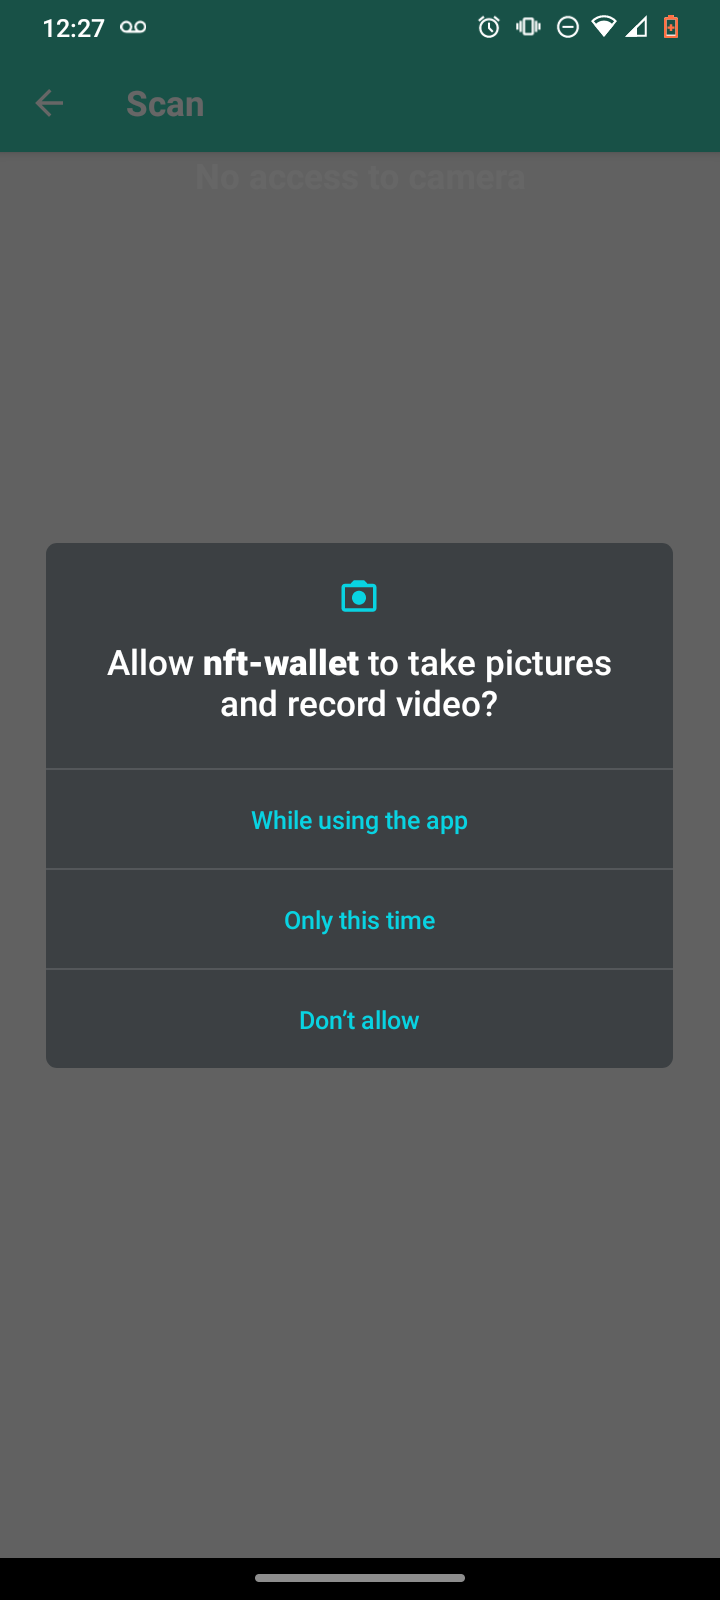 NFTPass wallet QR code scanning screen prompting permission to use camera